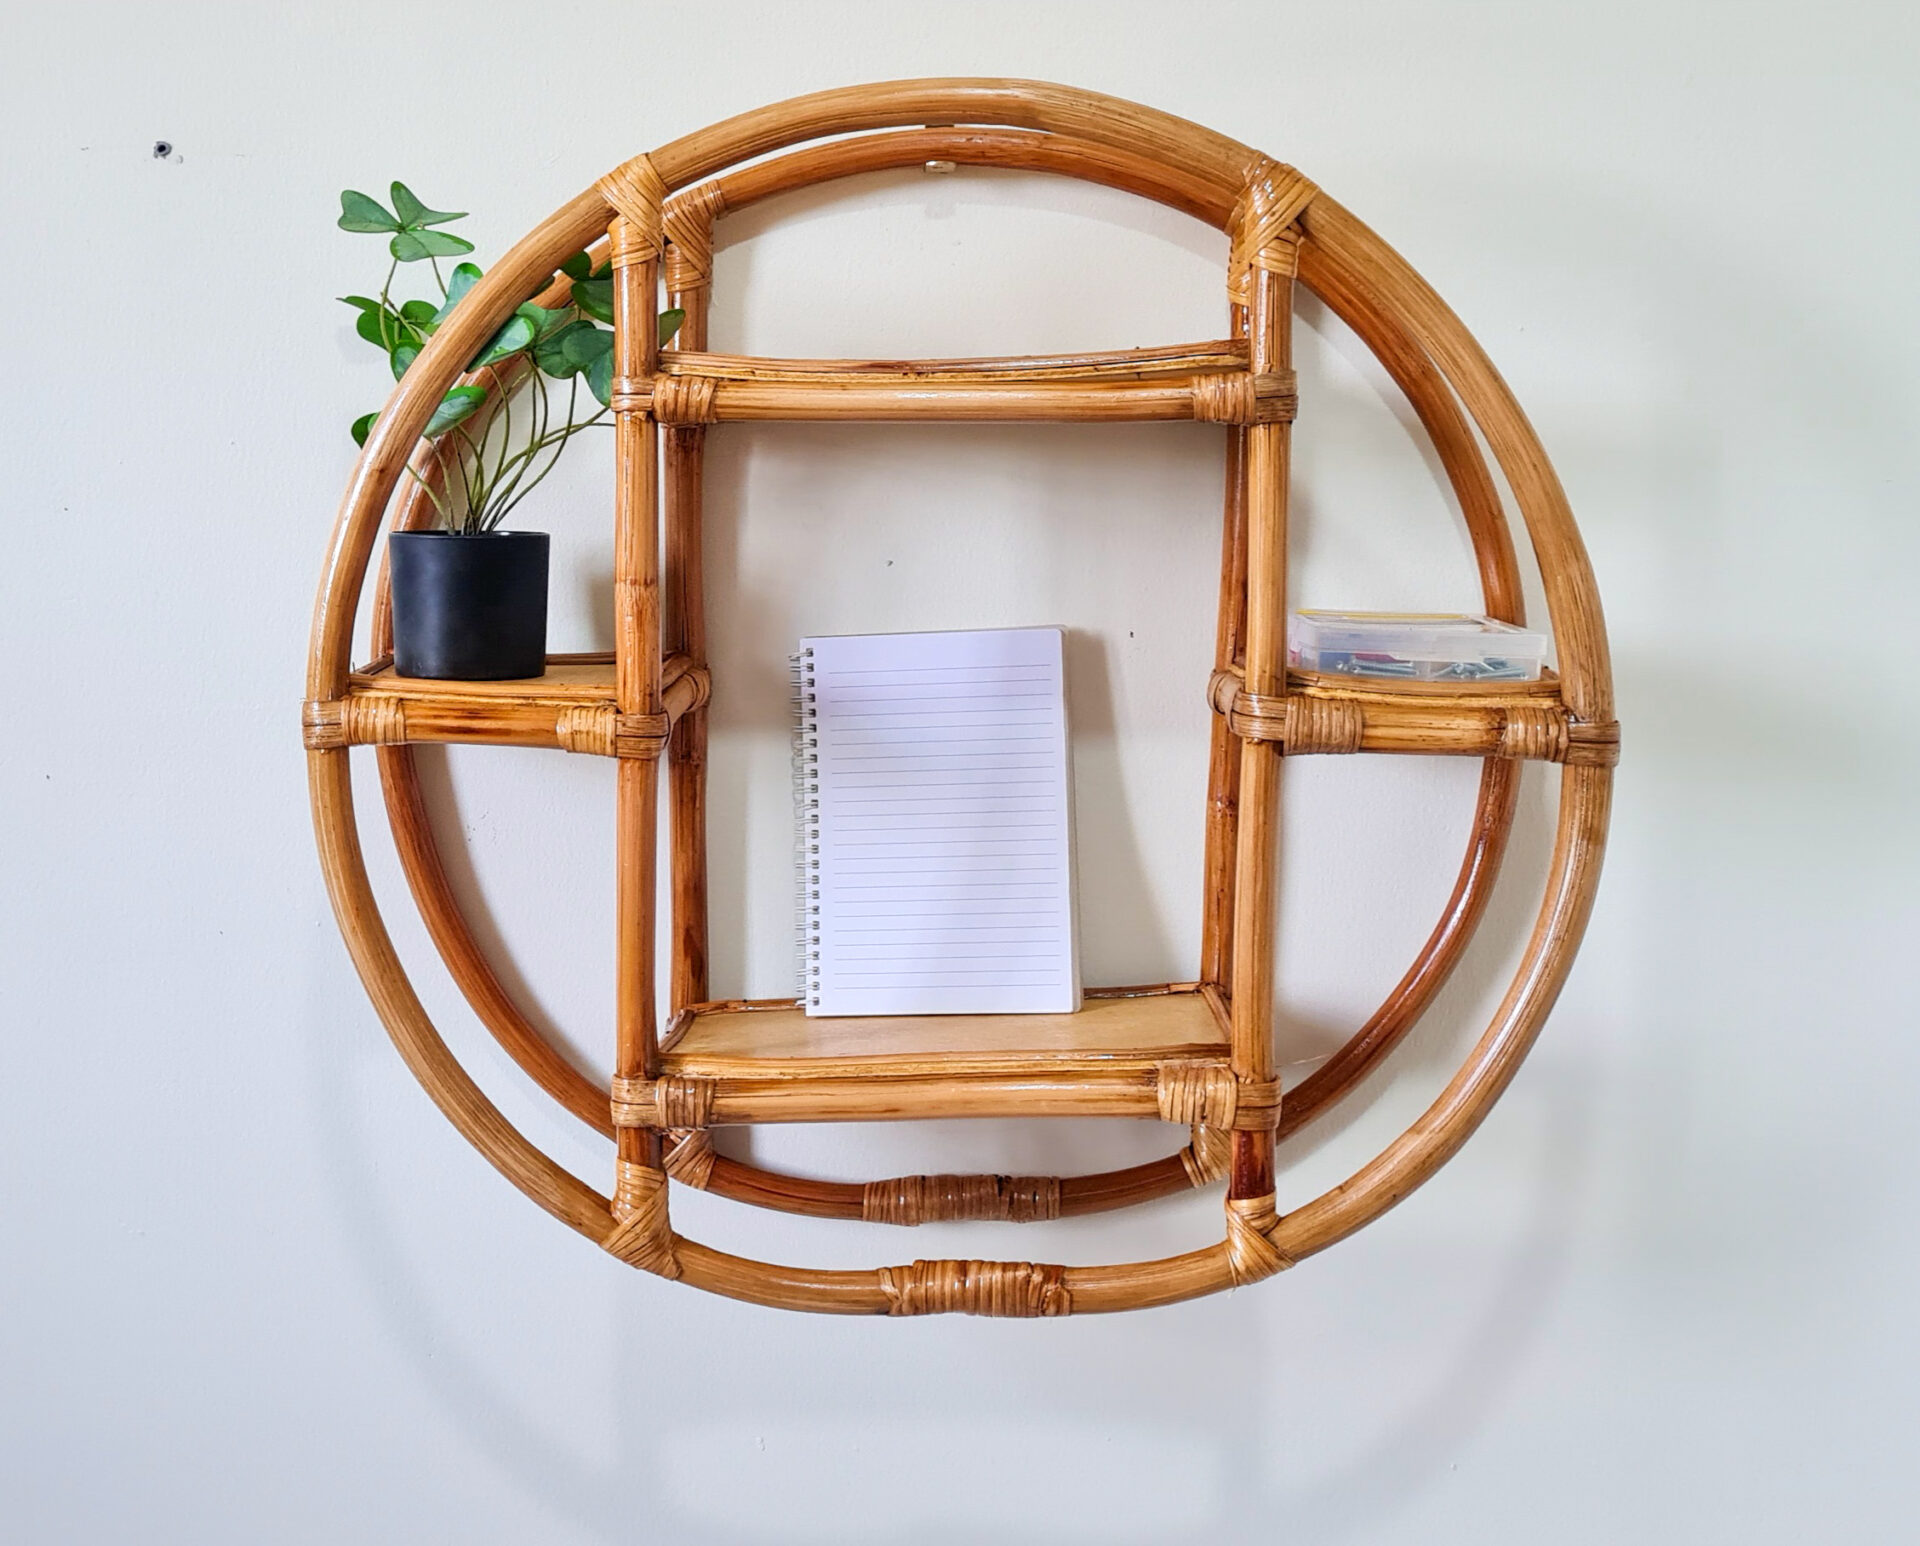 Four Tier Round Rattan Wall Shelf - BambooPlusWood - Free Worldwide Delivery